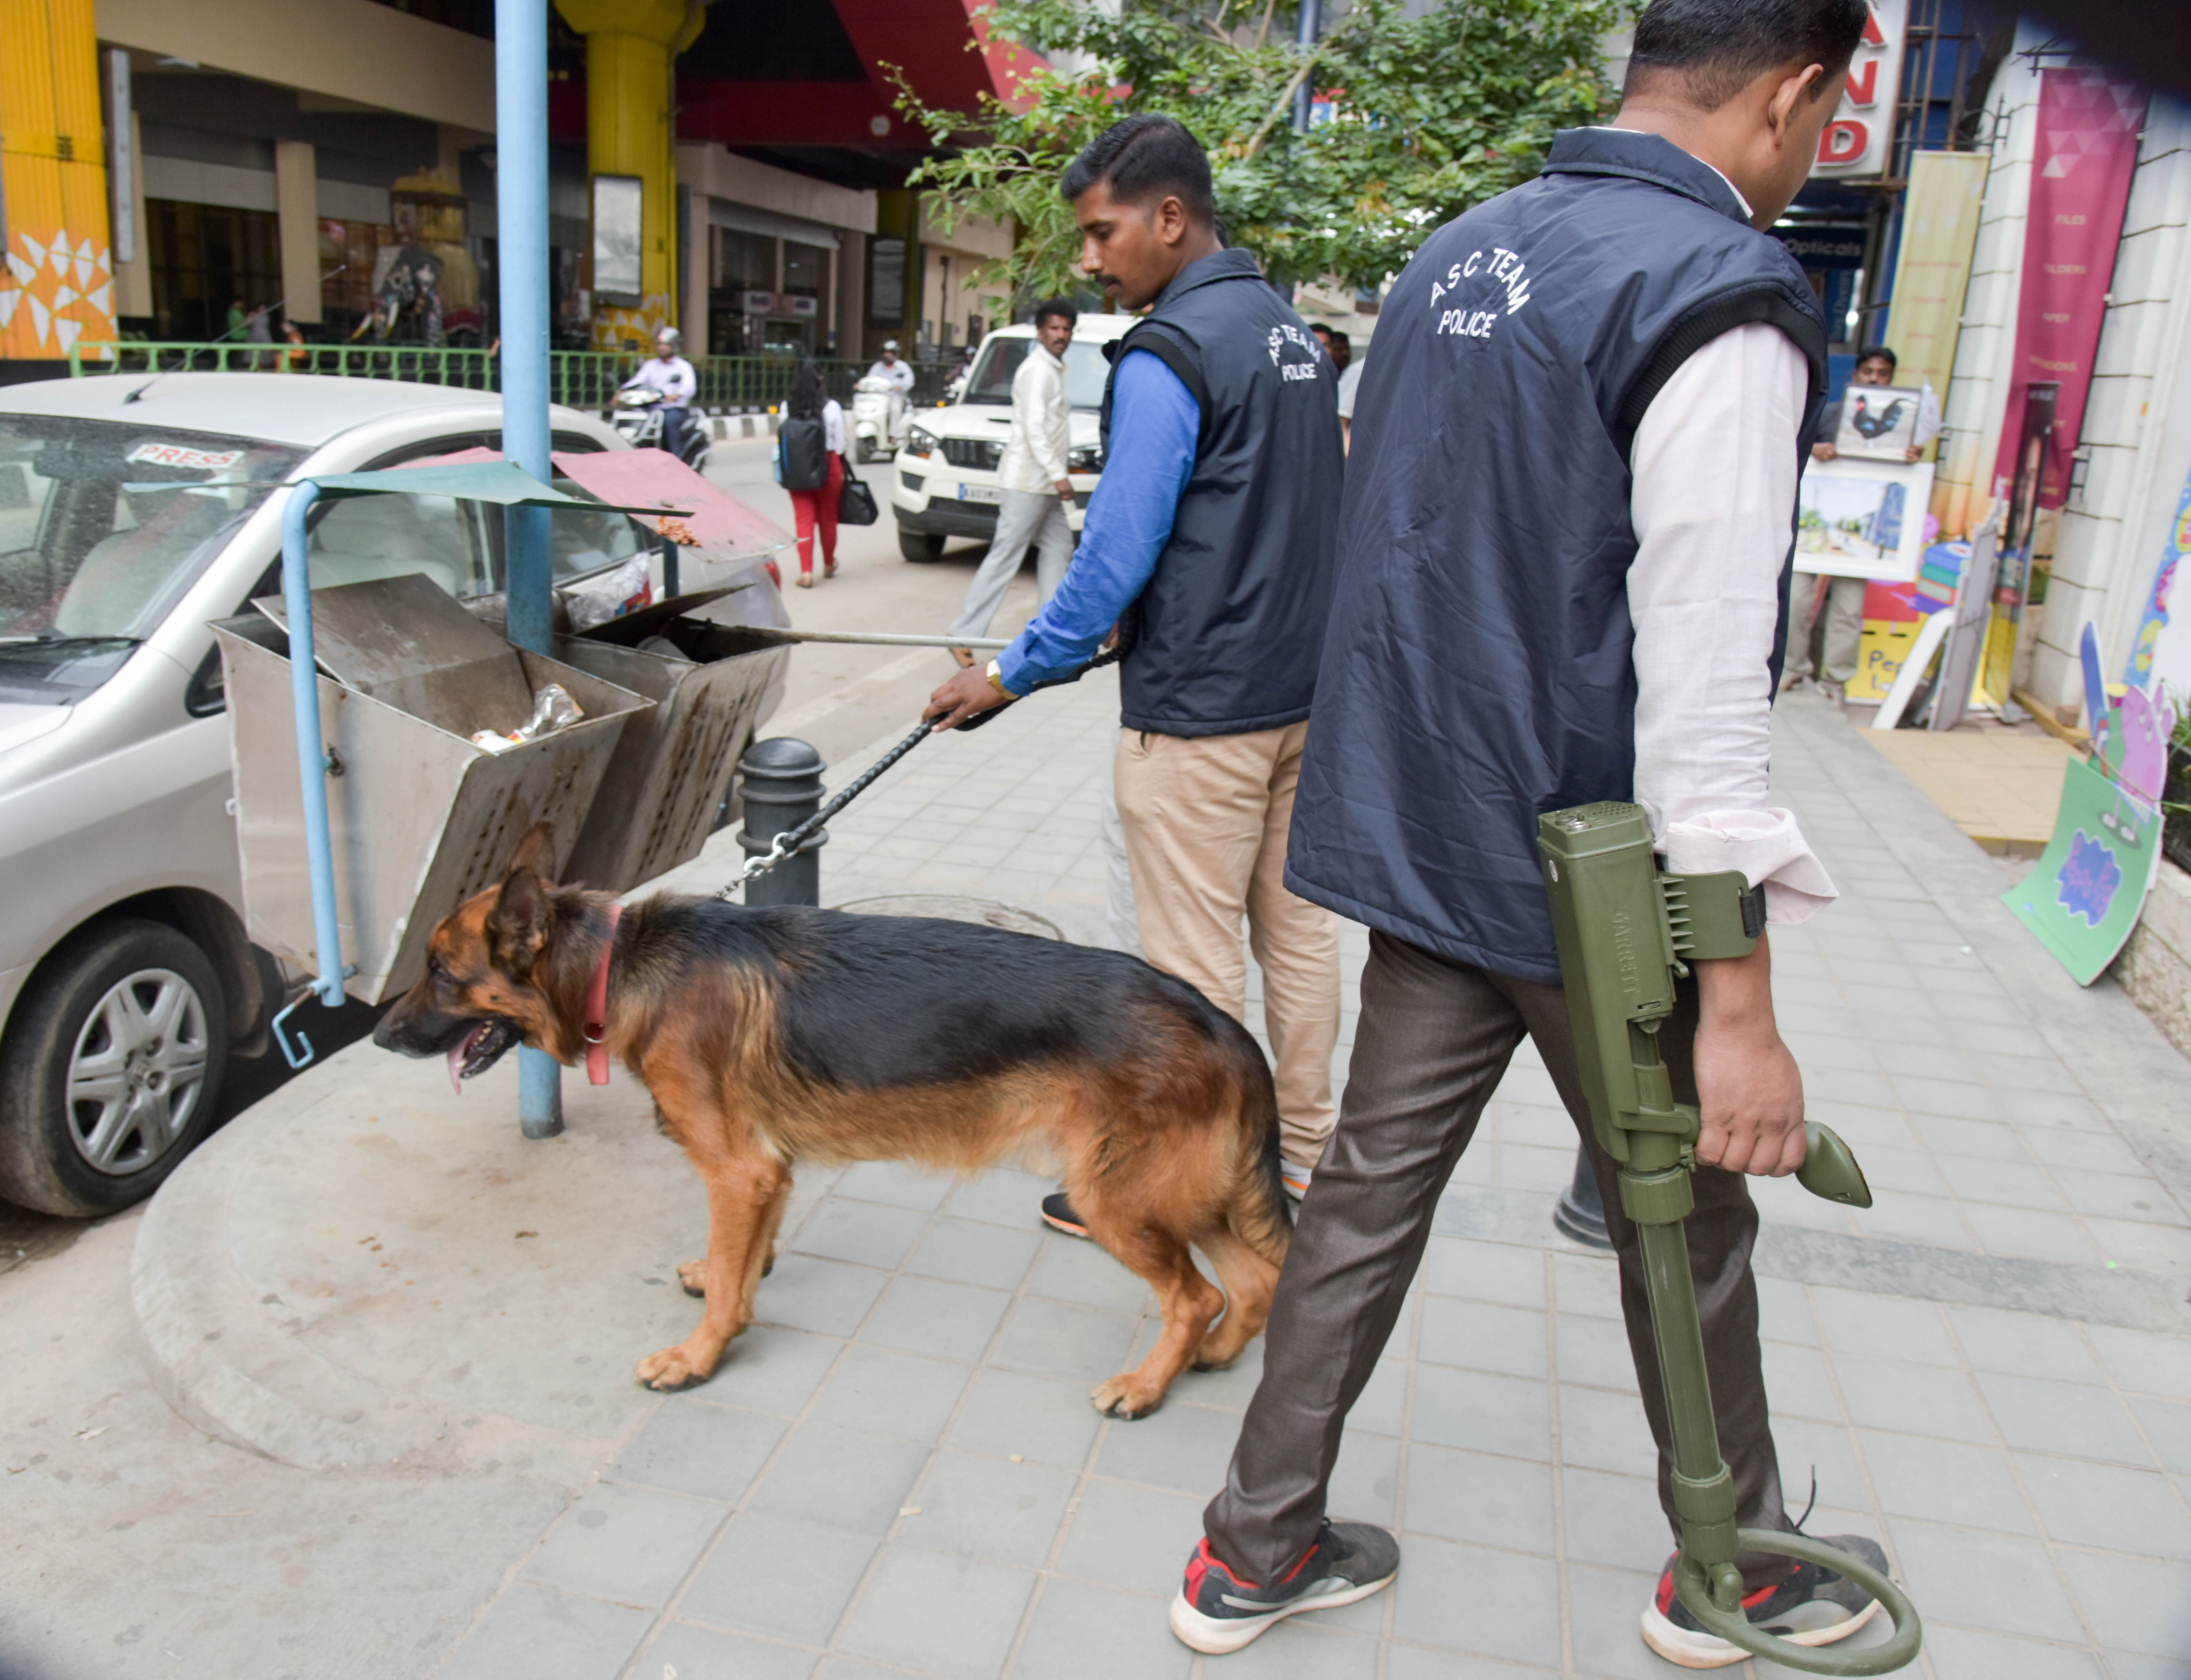 A dog squad and a bomb disposal team were pressed into service in Bengaluru, ahead of Independence Day celebrations, as part of a nationwide security alert.